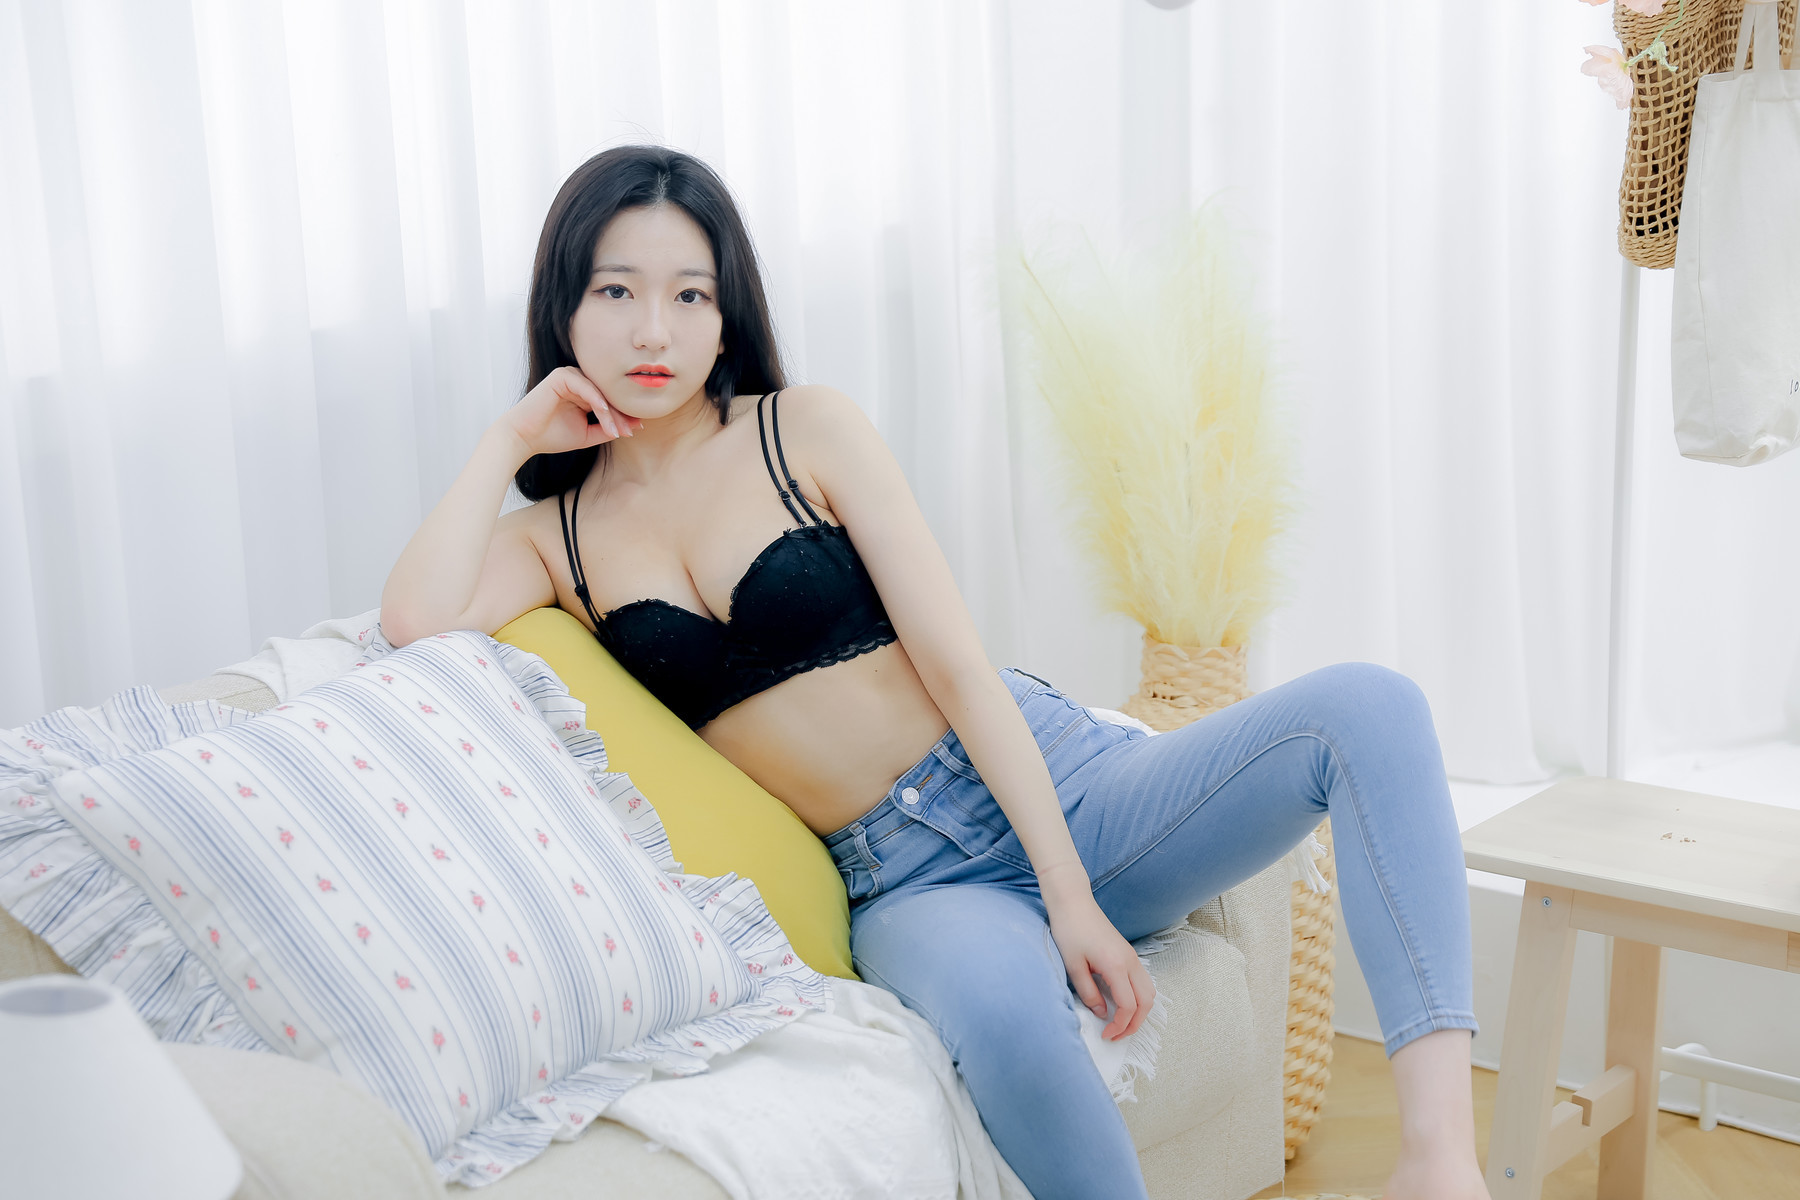 Sehee 세희, [JOApictures] Sehee x JOA 21. MARCH Vol.1 &#8211; Set.01